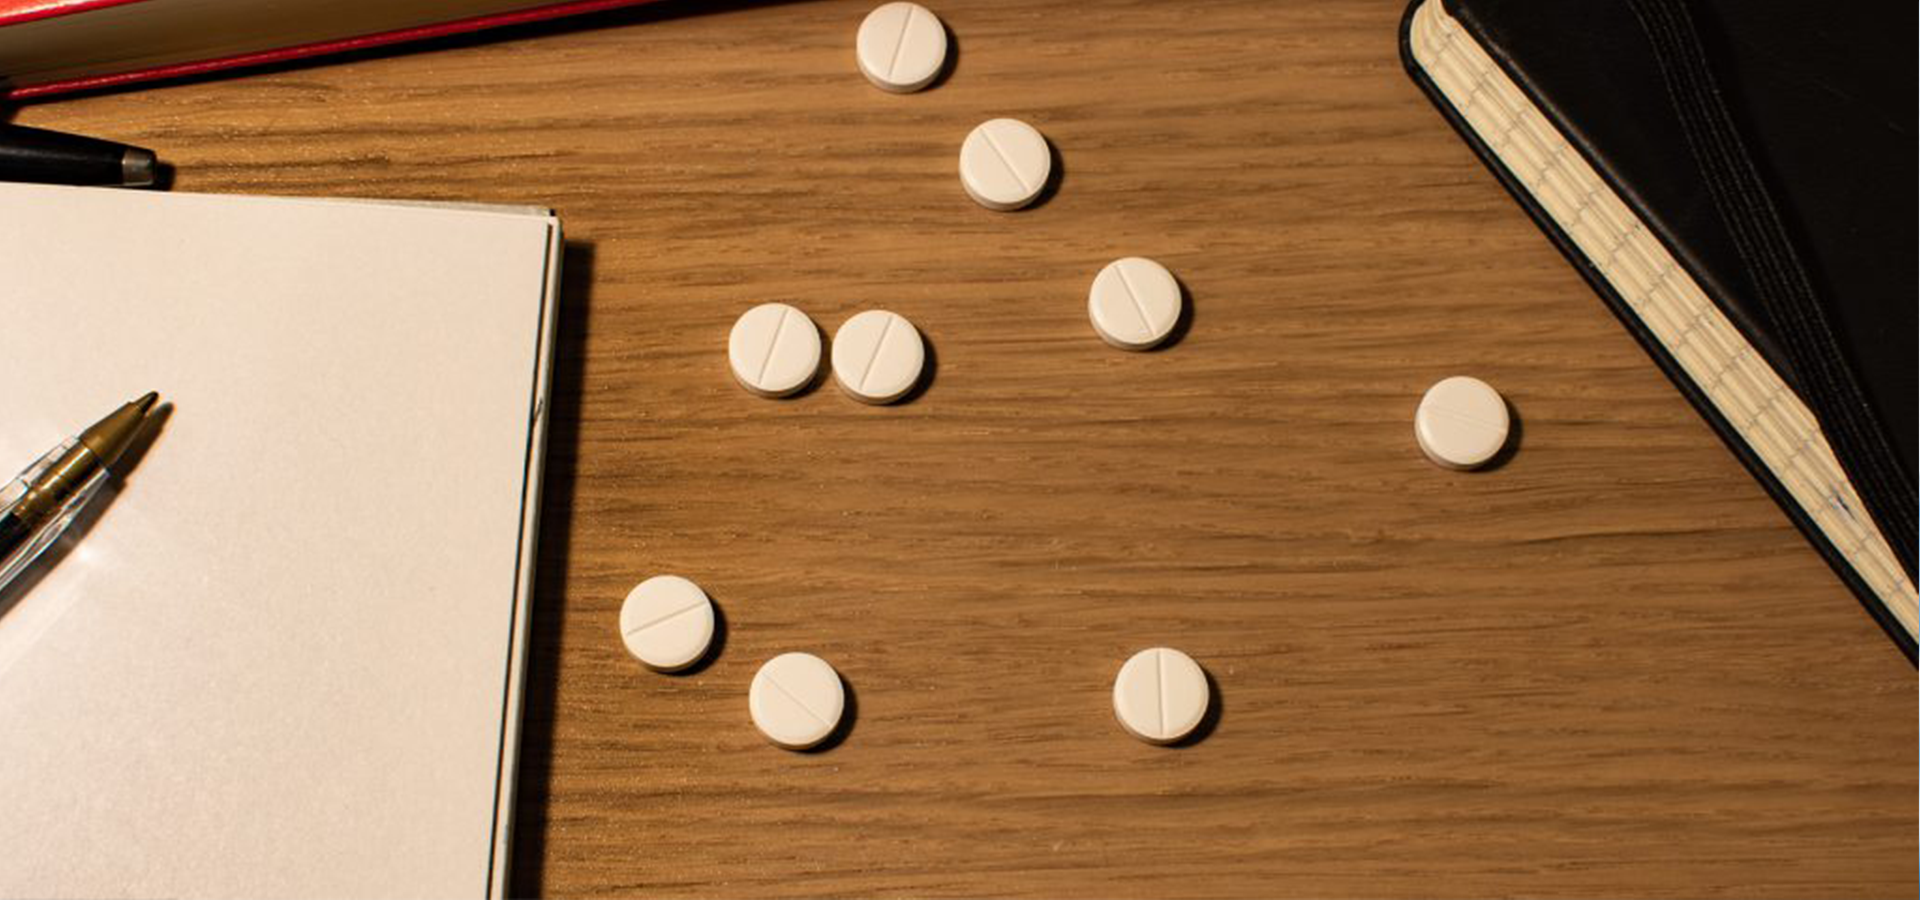 pills on a desk make people think about college students and substance abuse